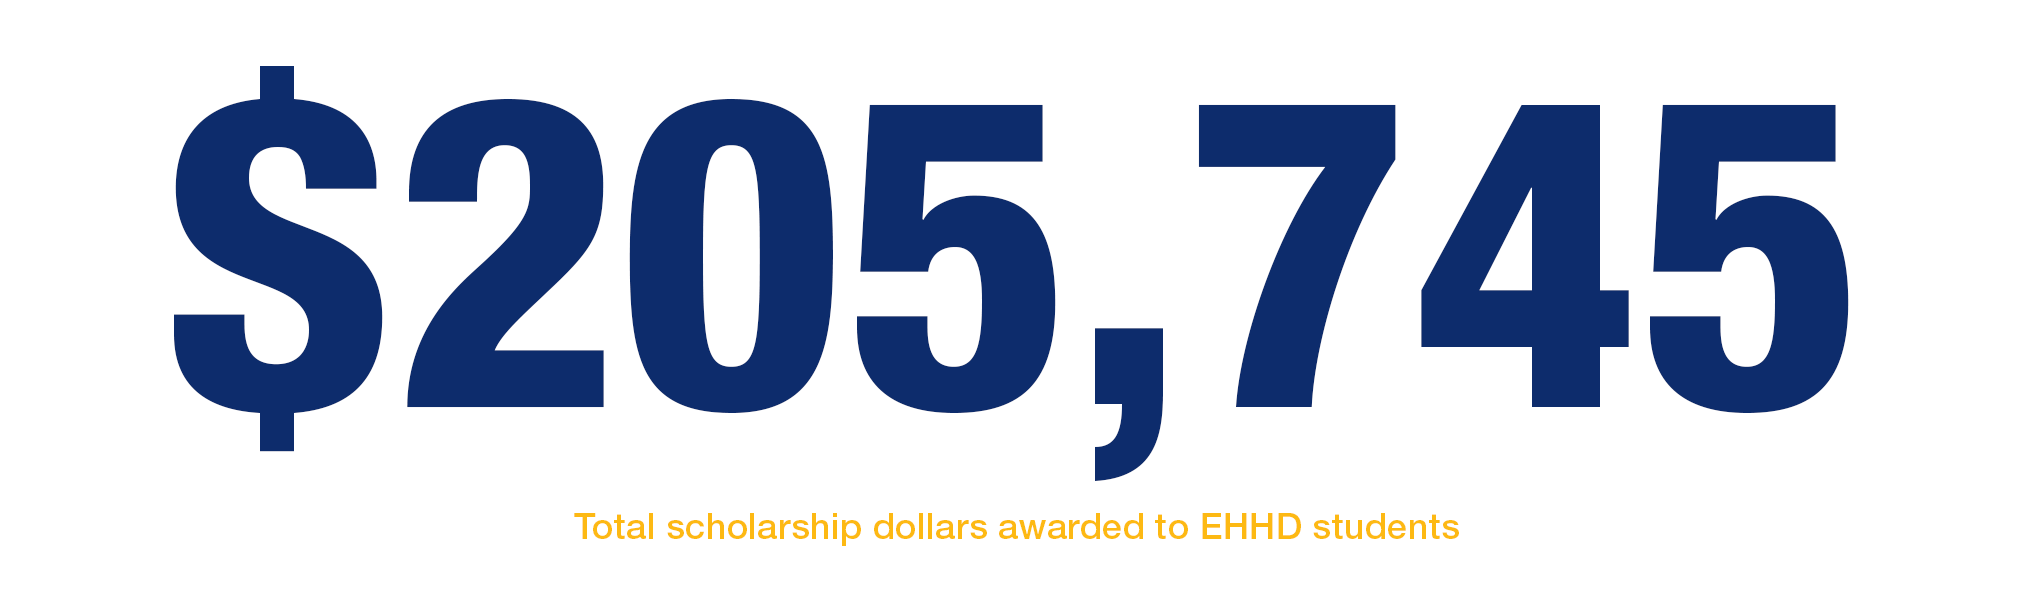 $205,745 were awarded to EHHD students